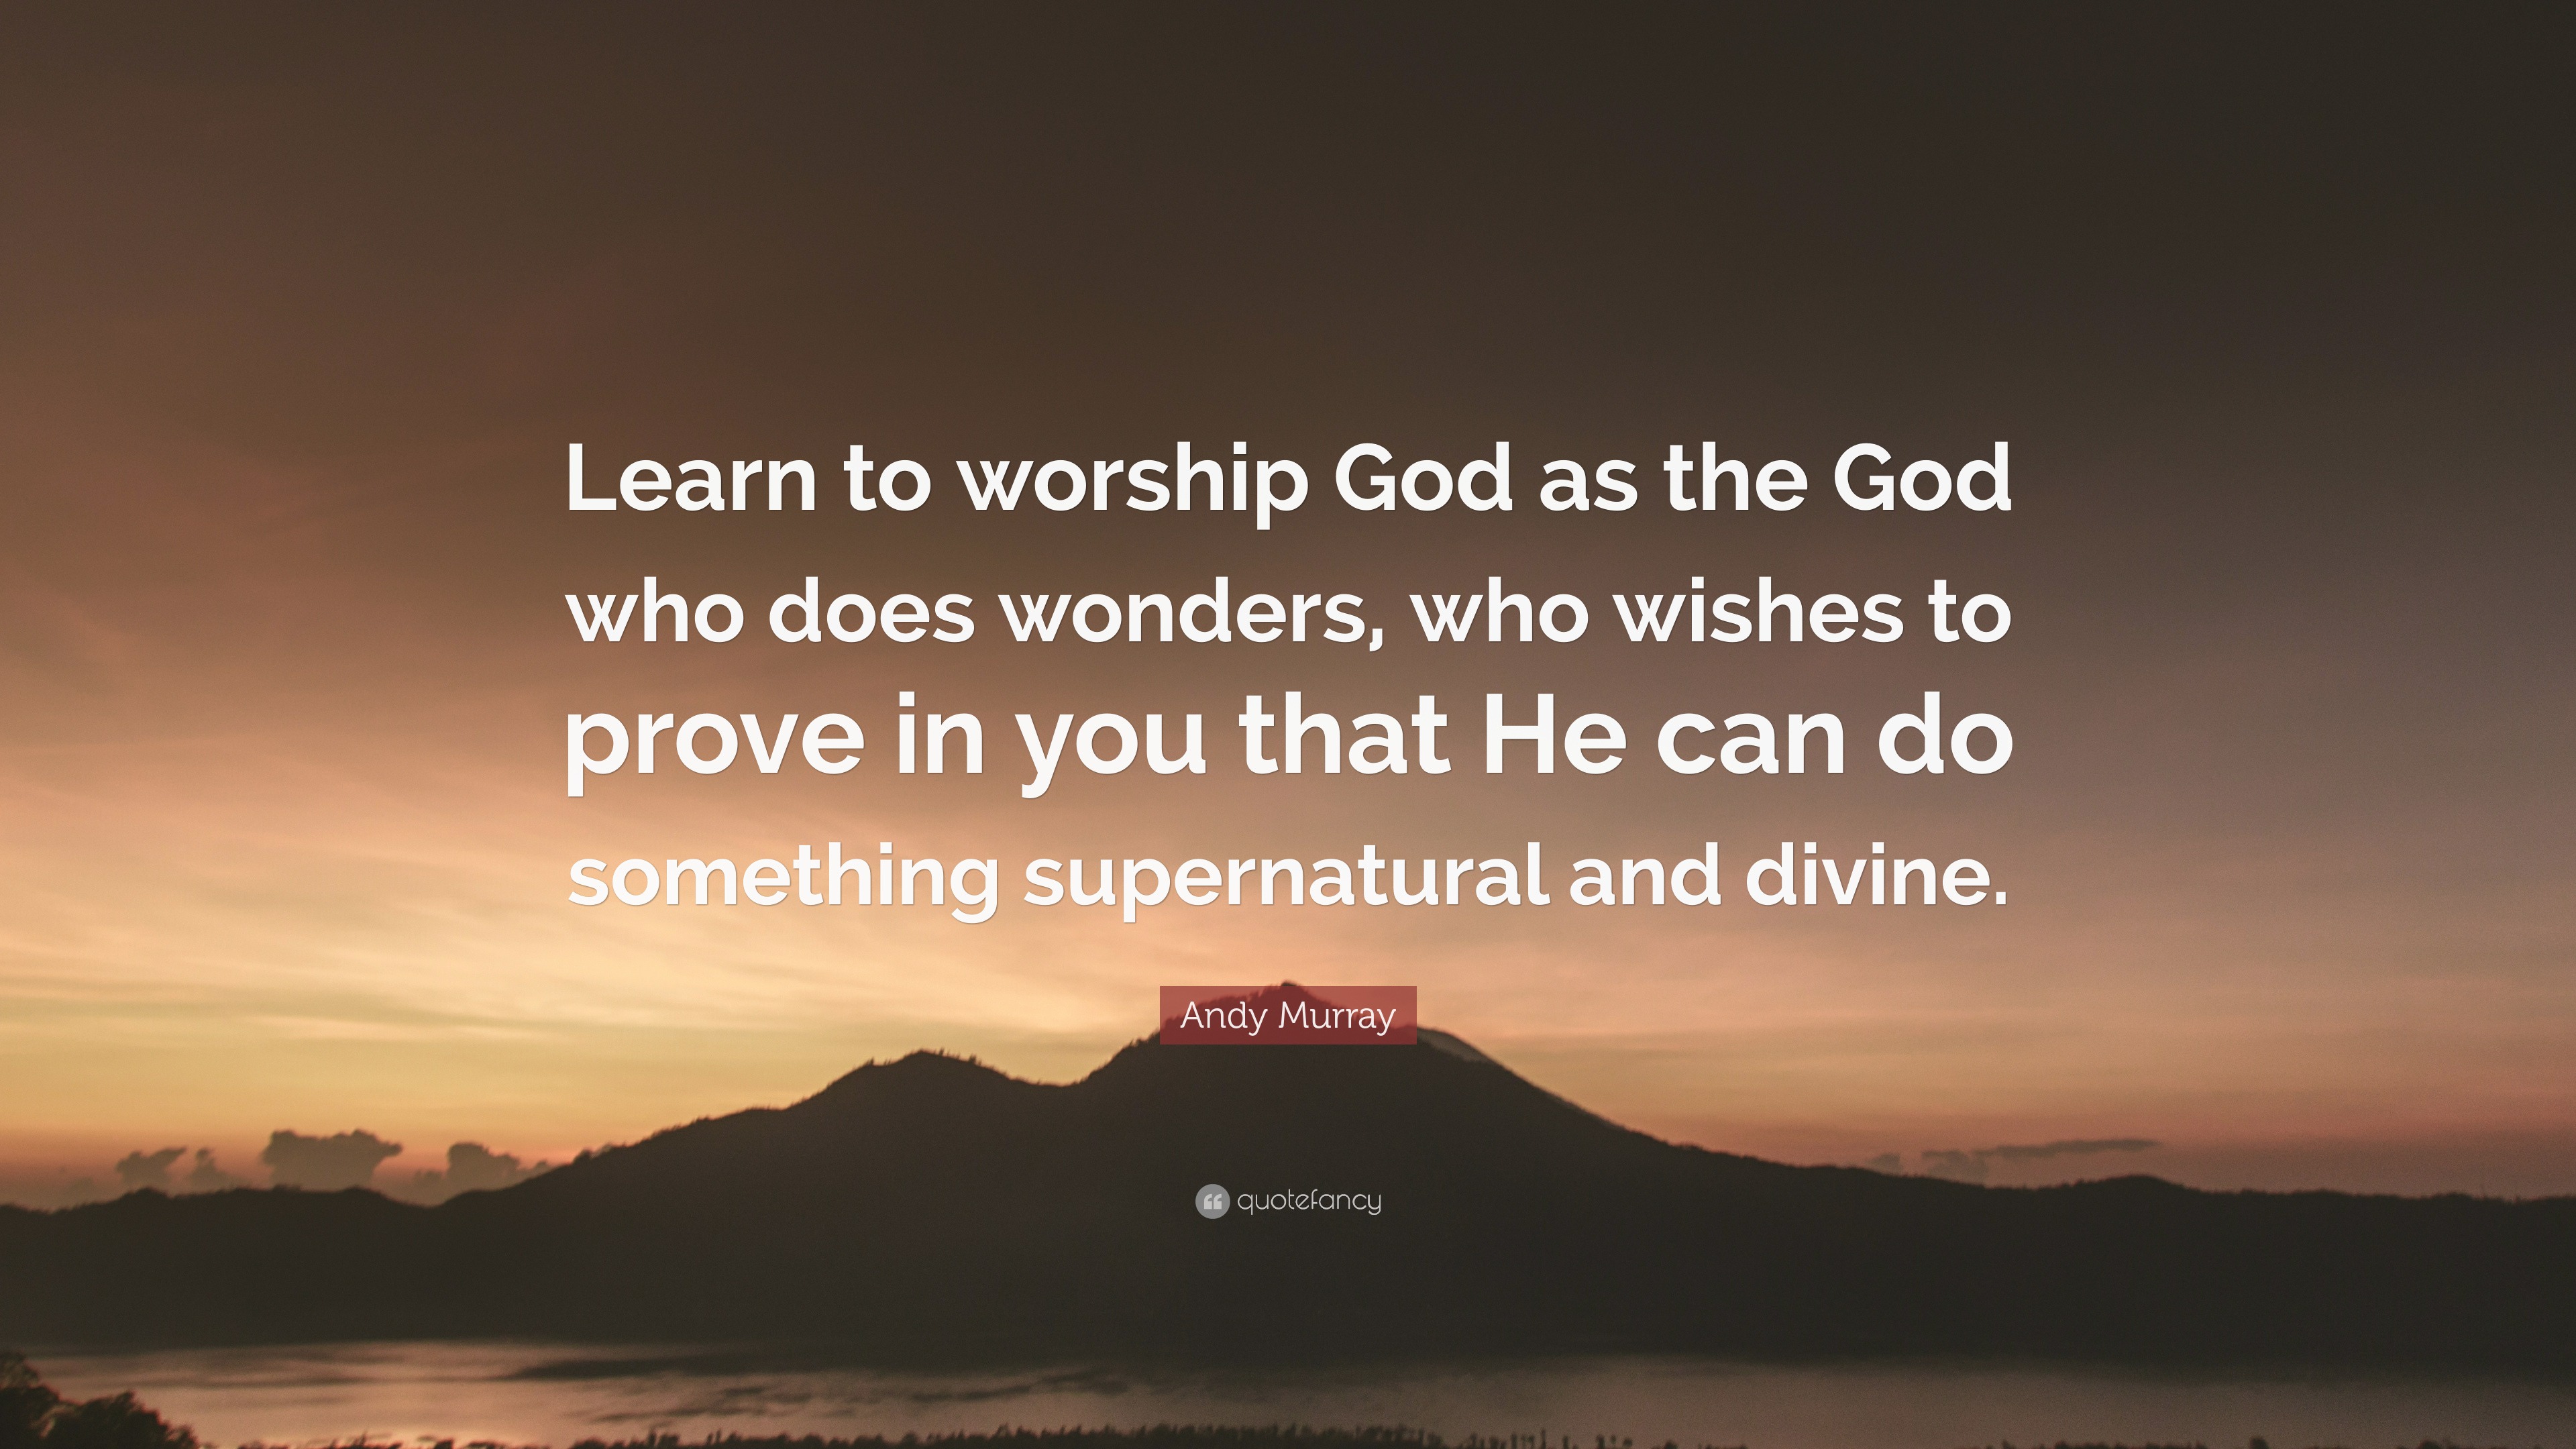 3897770-Andy-Murray-Quote-Learn-to-worship-God-as-the-God-who-does-wonders.jpg